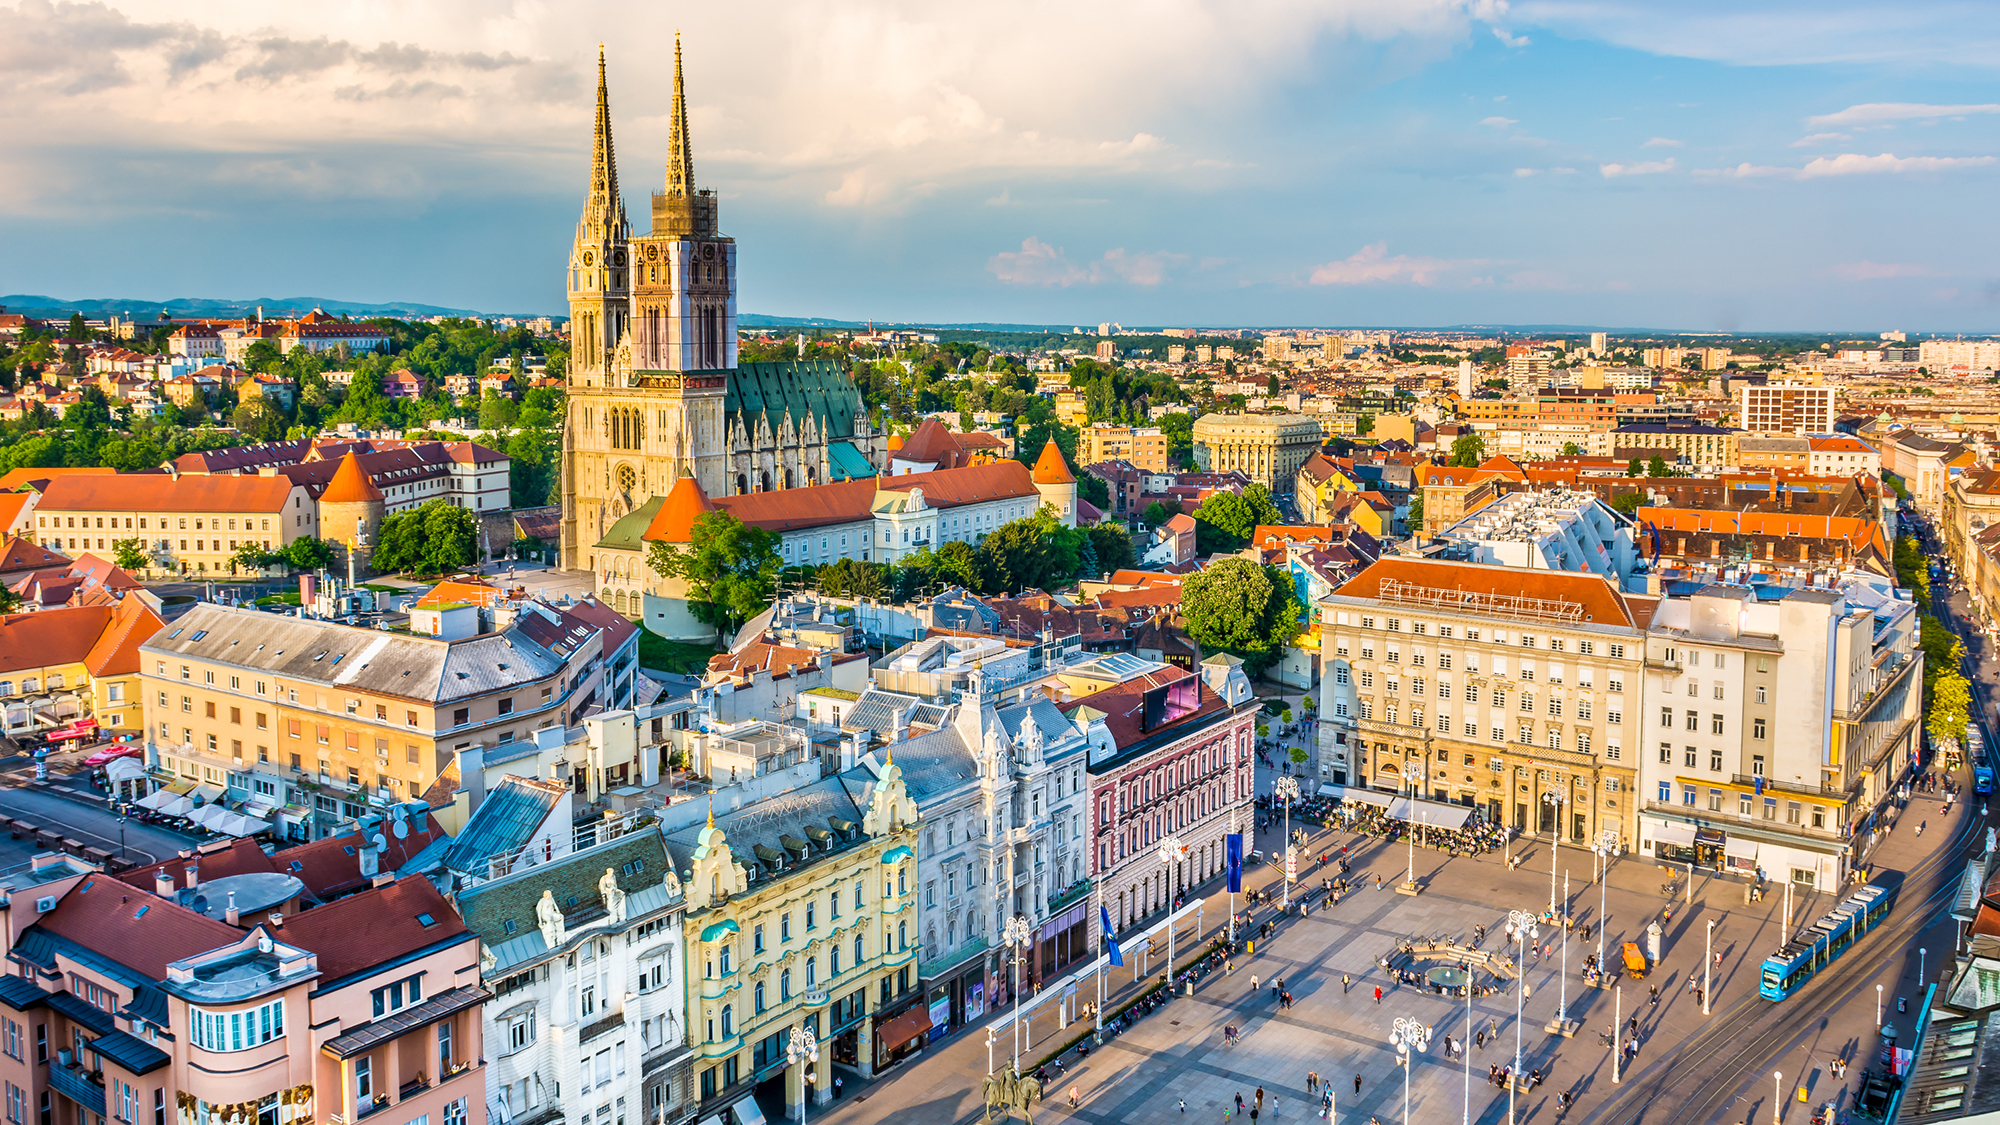 Aerial view at old city center and main square of capital of Croatia, Zagreb, Europe.